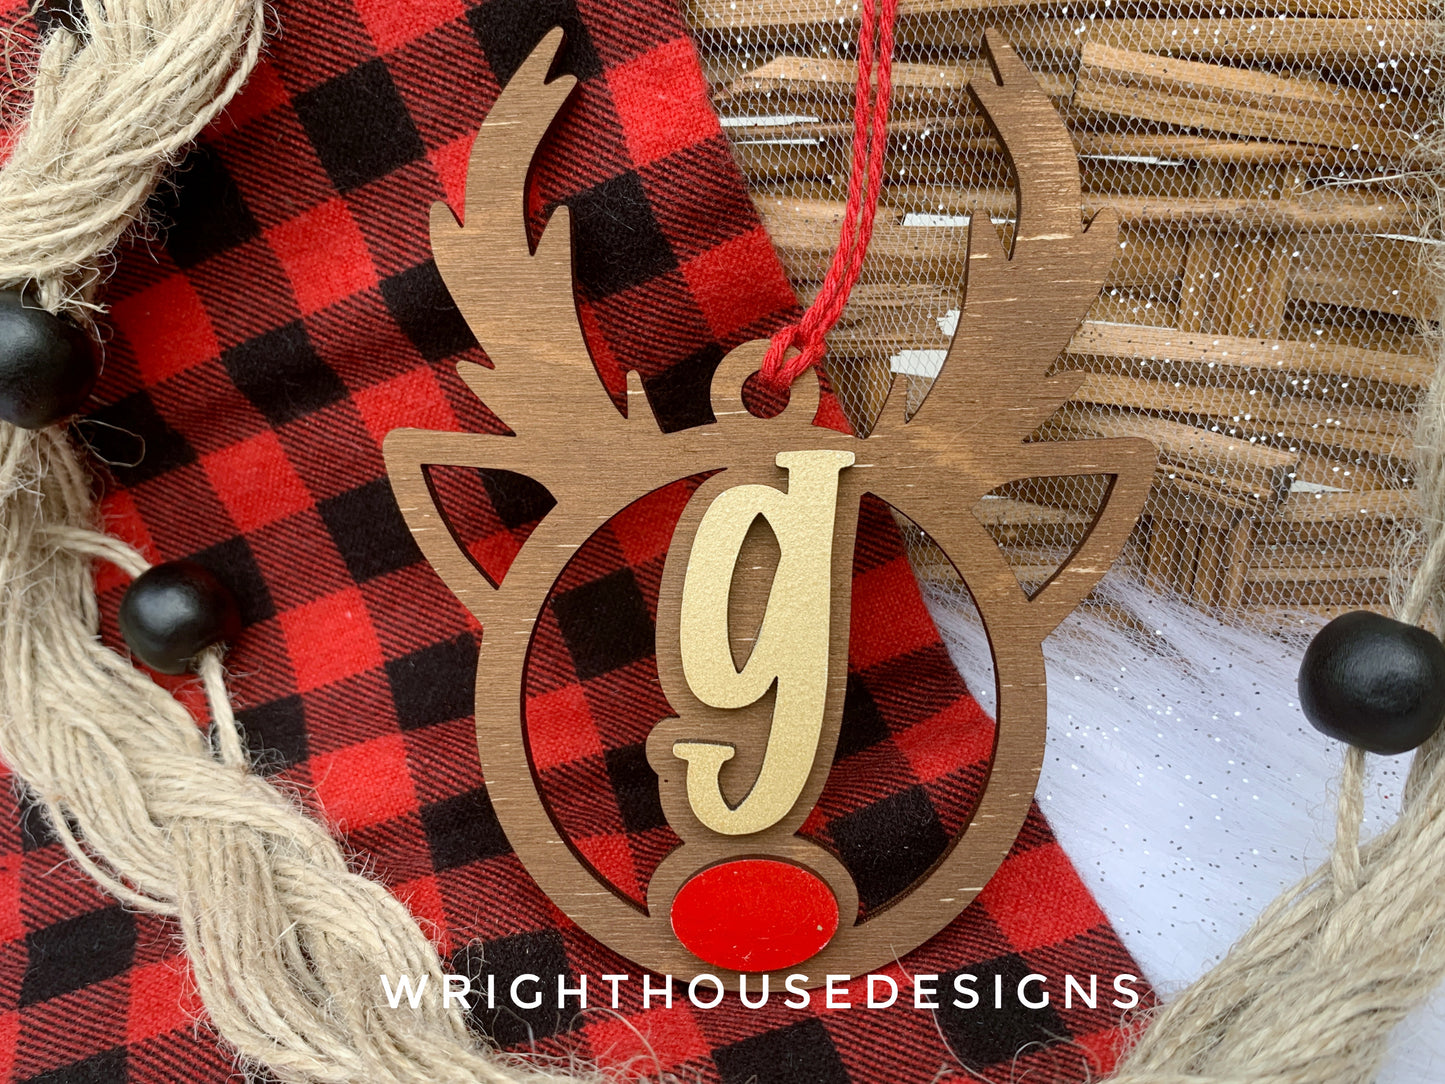 Personalized Reindeer - Monogram Name Initial - Wooden Christmas Tree Ornament - Gift Bag Tag - Handmade - Winter Decor - Holiday Gift